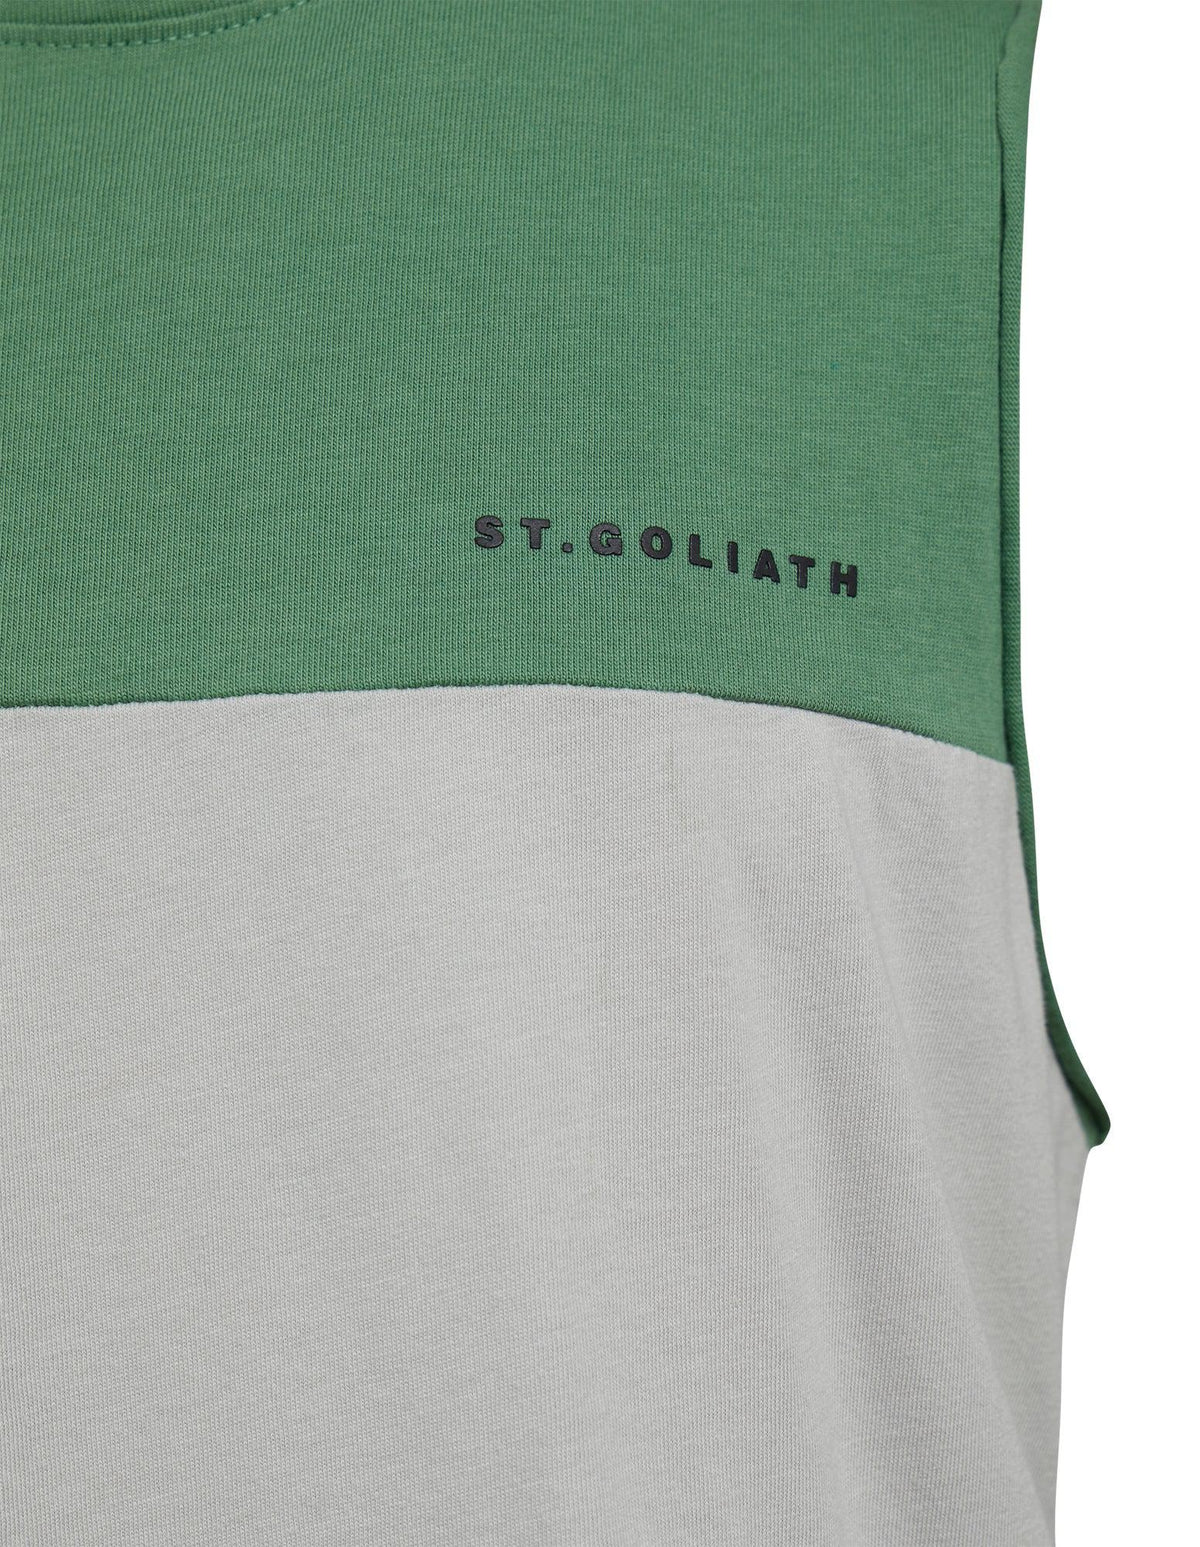 St Goliath 3-7-Kids Colour Block Muscle Green-Edge Clothing